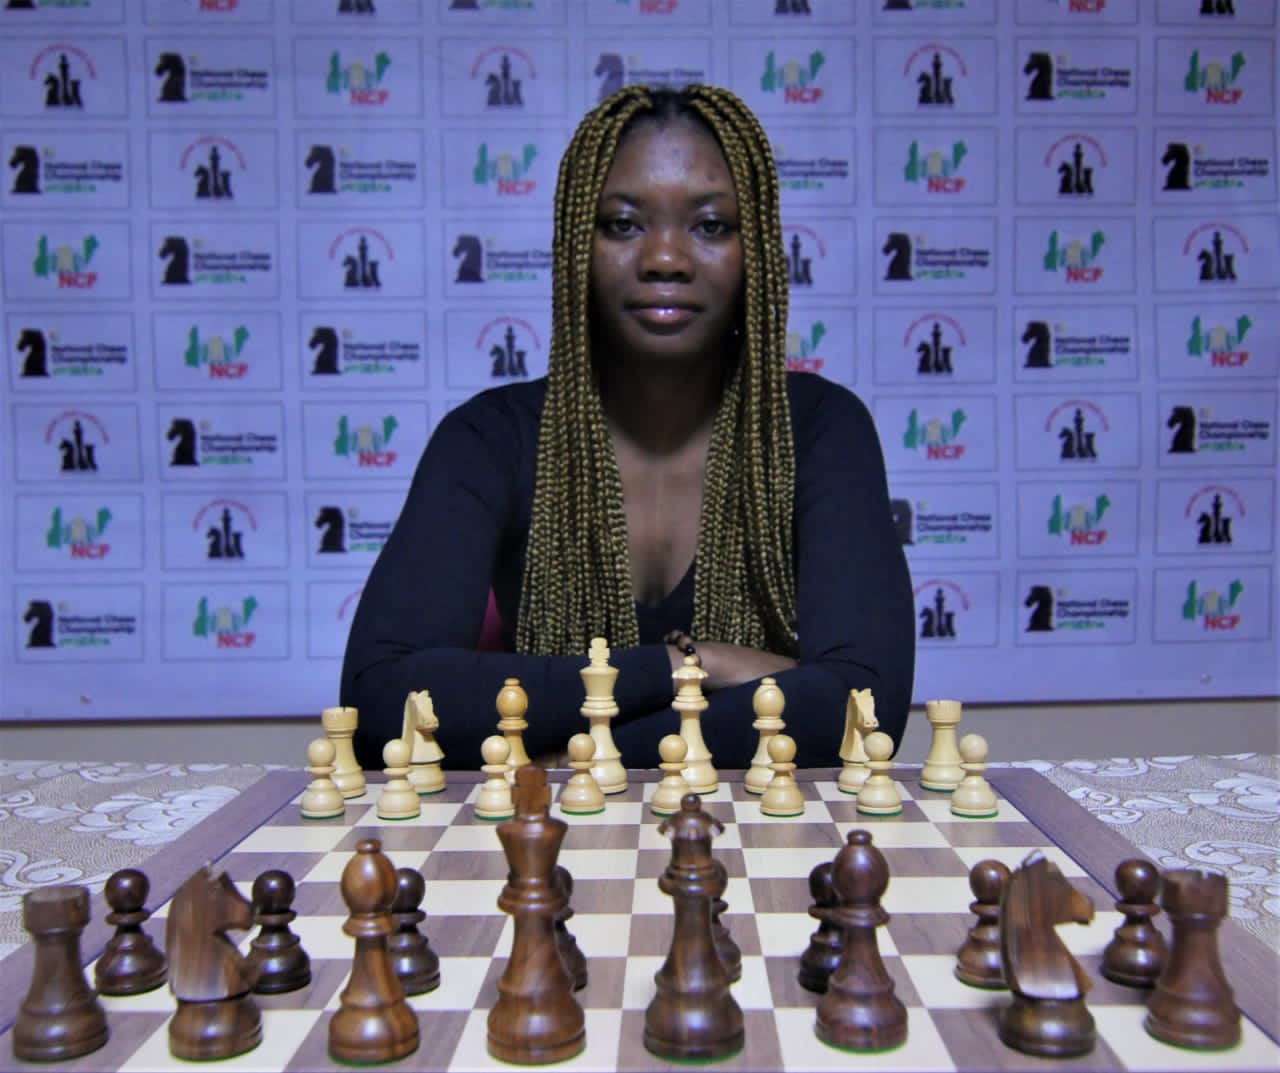 THE NATIONAL CHESS CHAMPIONSHIP OF NIGERIA: HISTORY IN THE MAKING | olchessclub.com